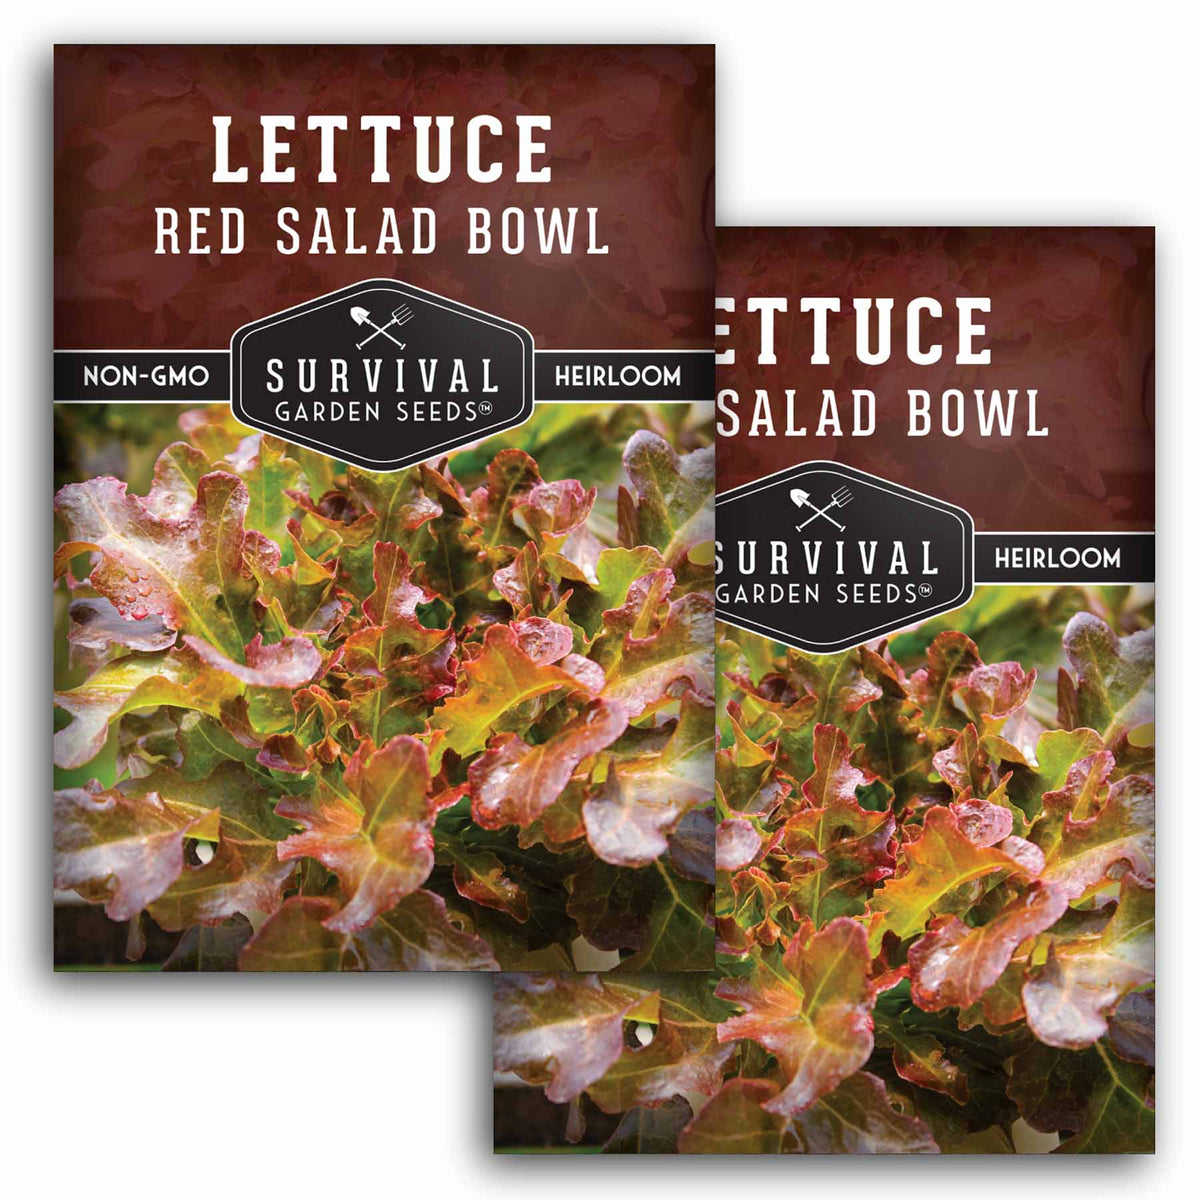 2 packets of Red Salad Bowl lettuce seeds